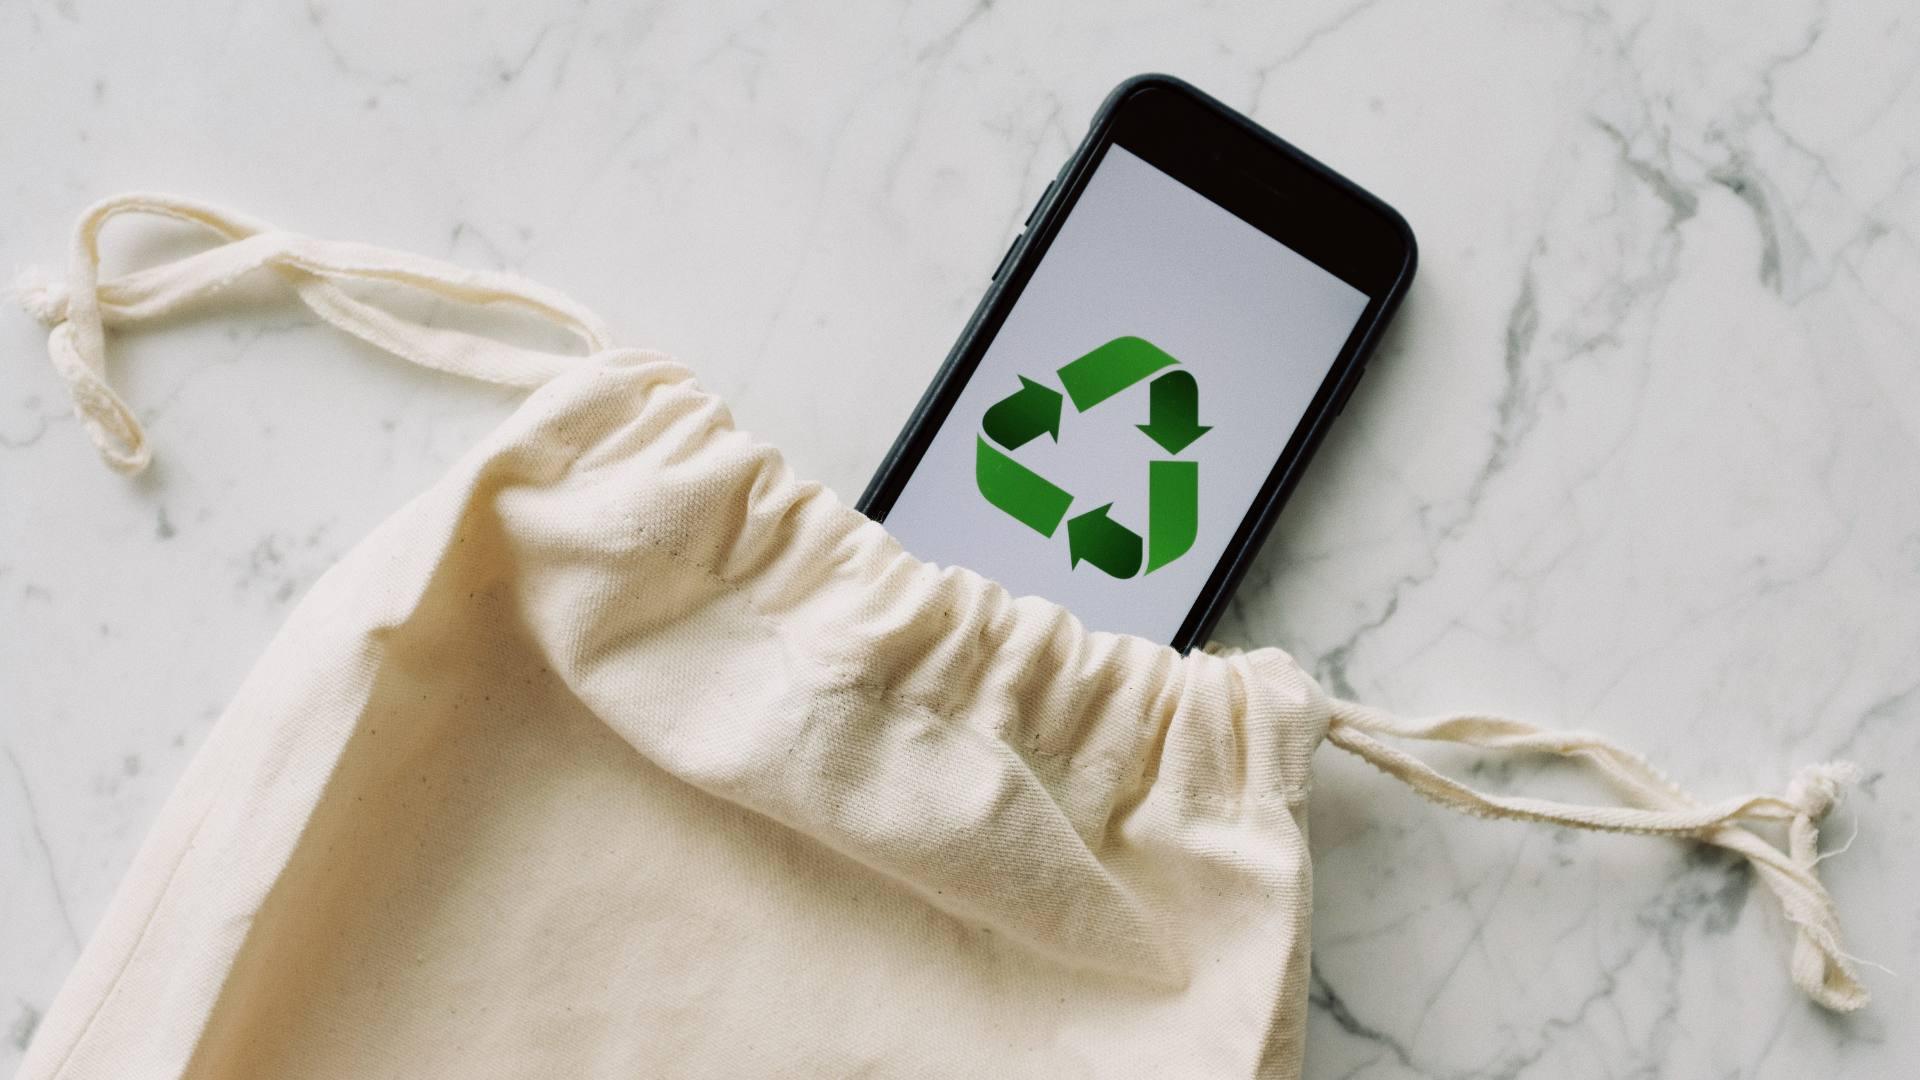 A white cloth bag is displayed with a phone coming out and a recycle symbol on it.